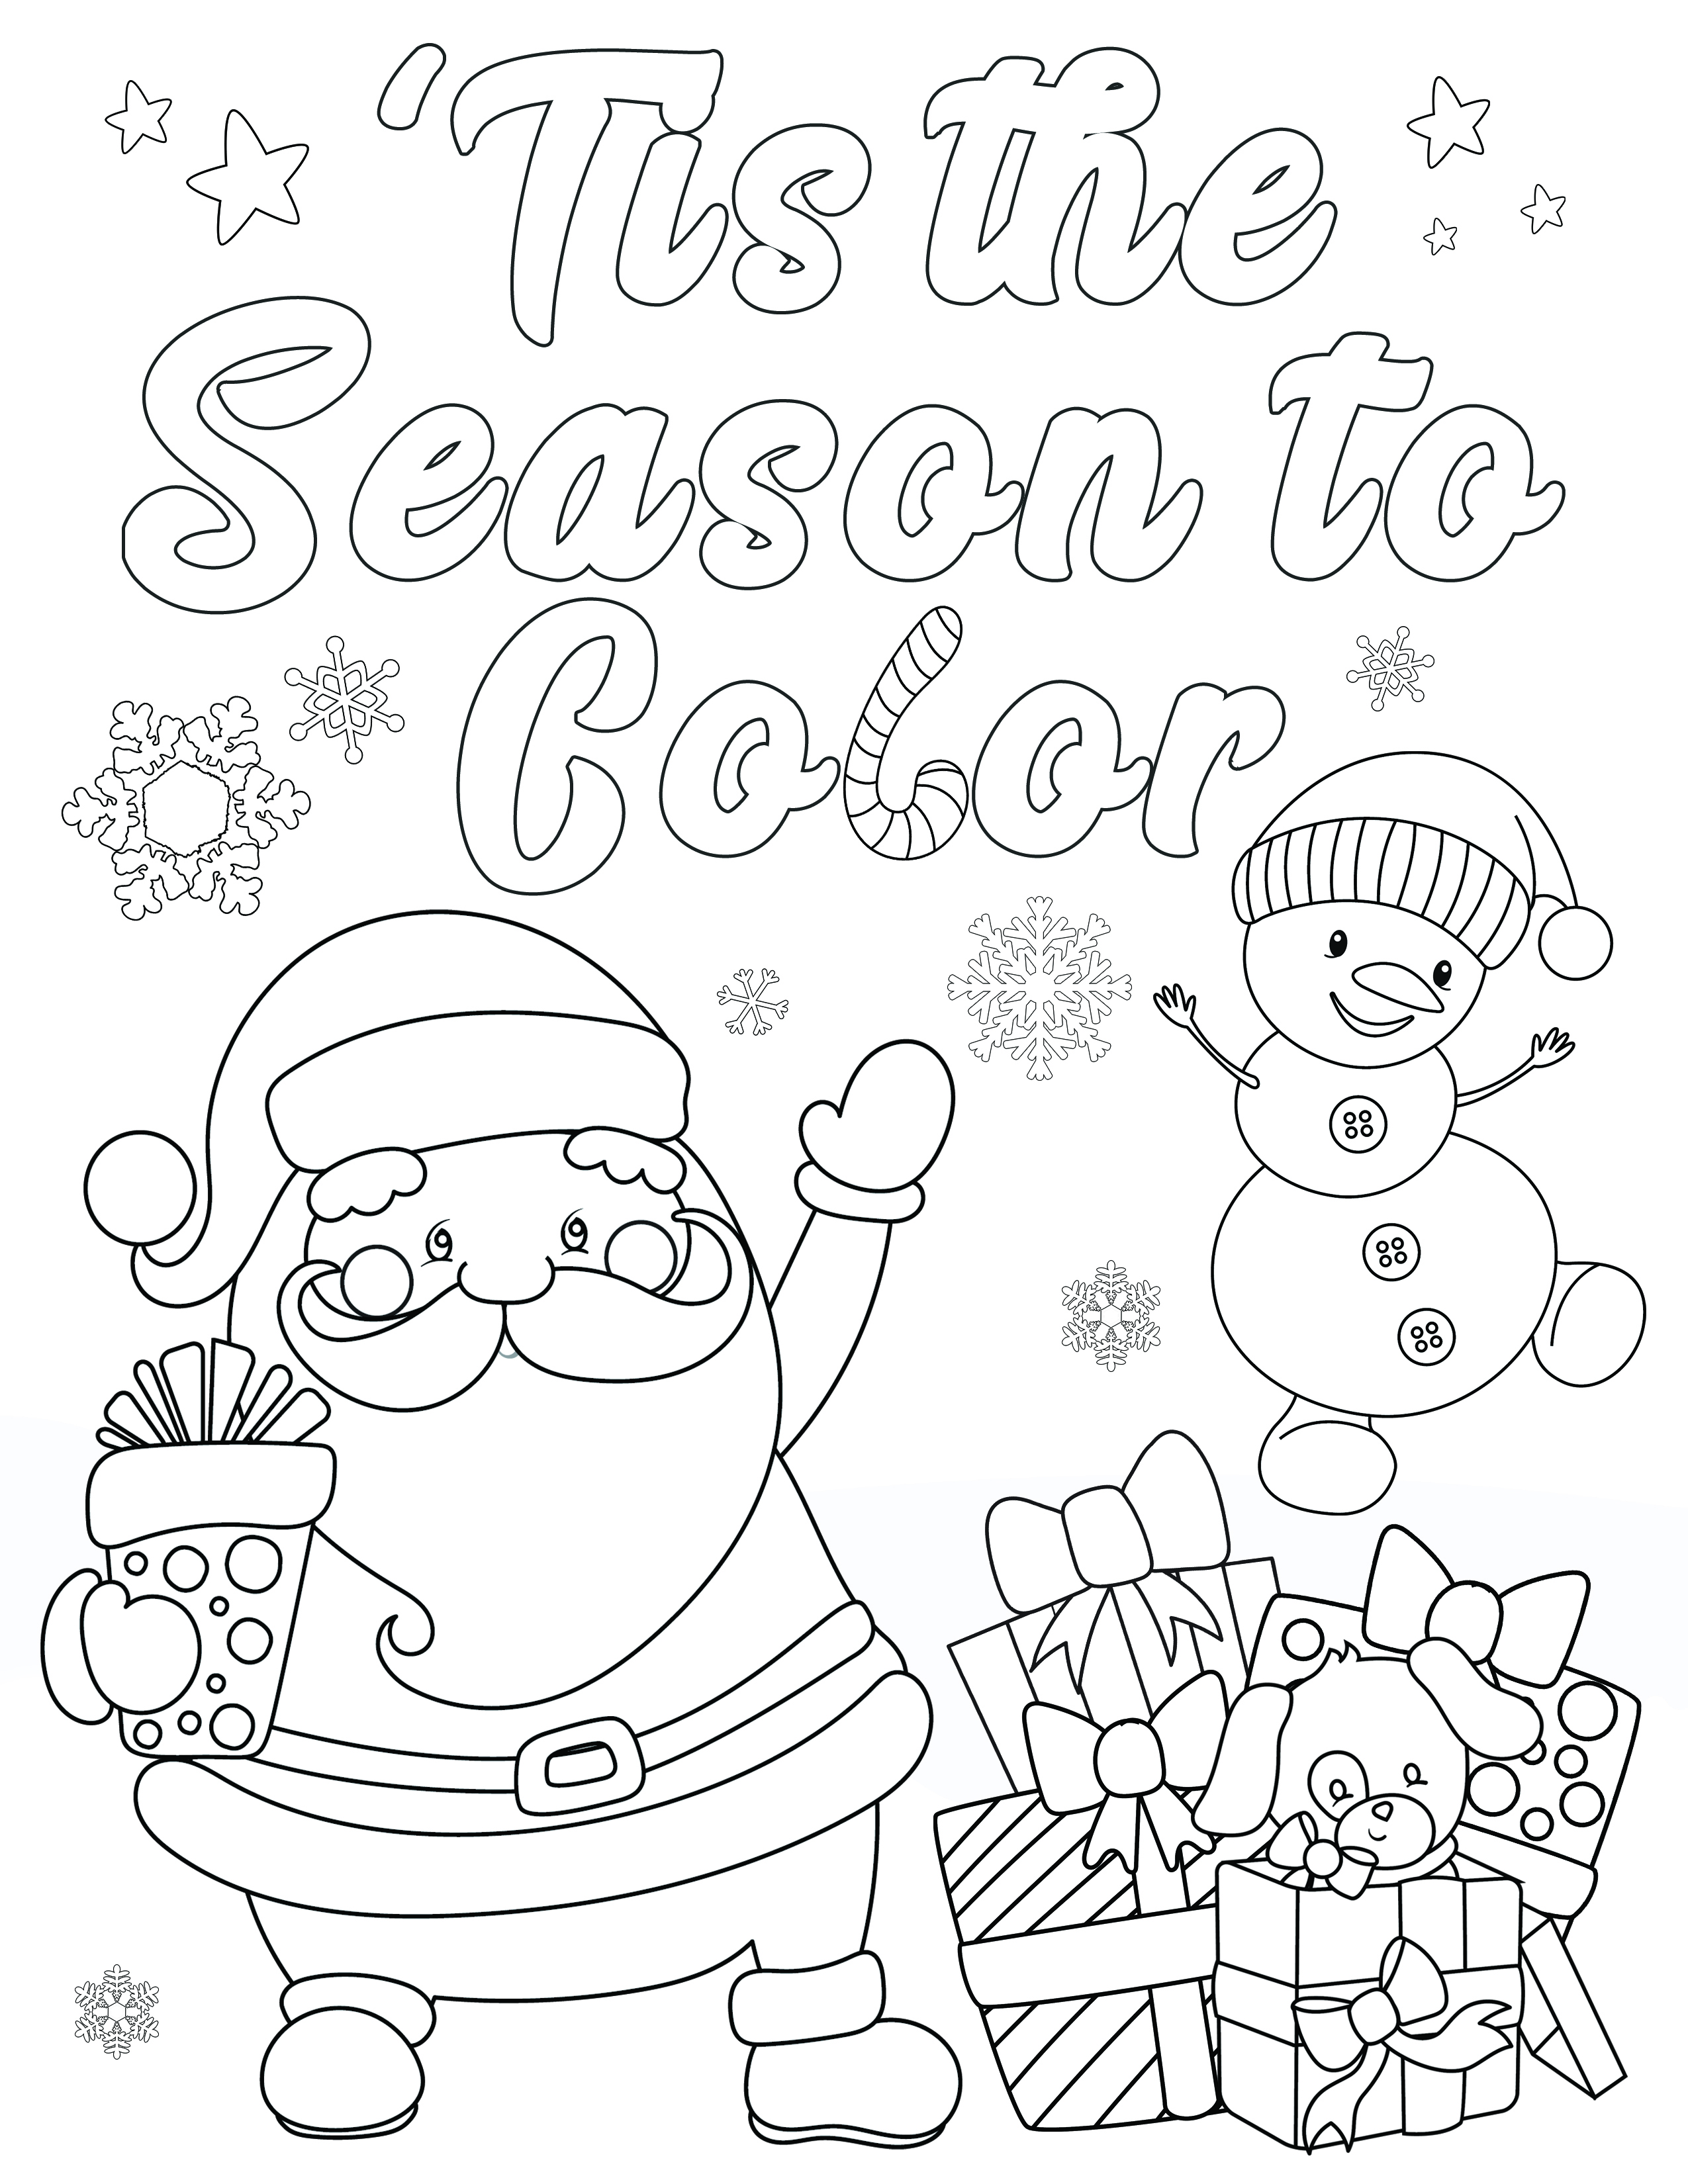 Download FREE Christmas Coloring Pages for Adults and Kids ...